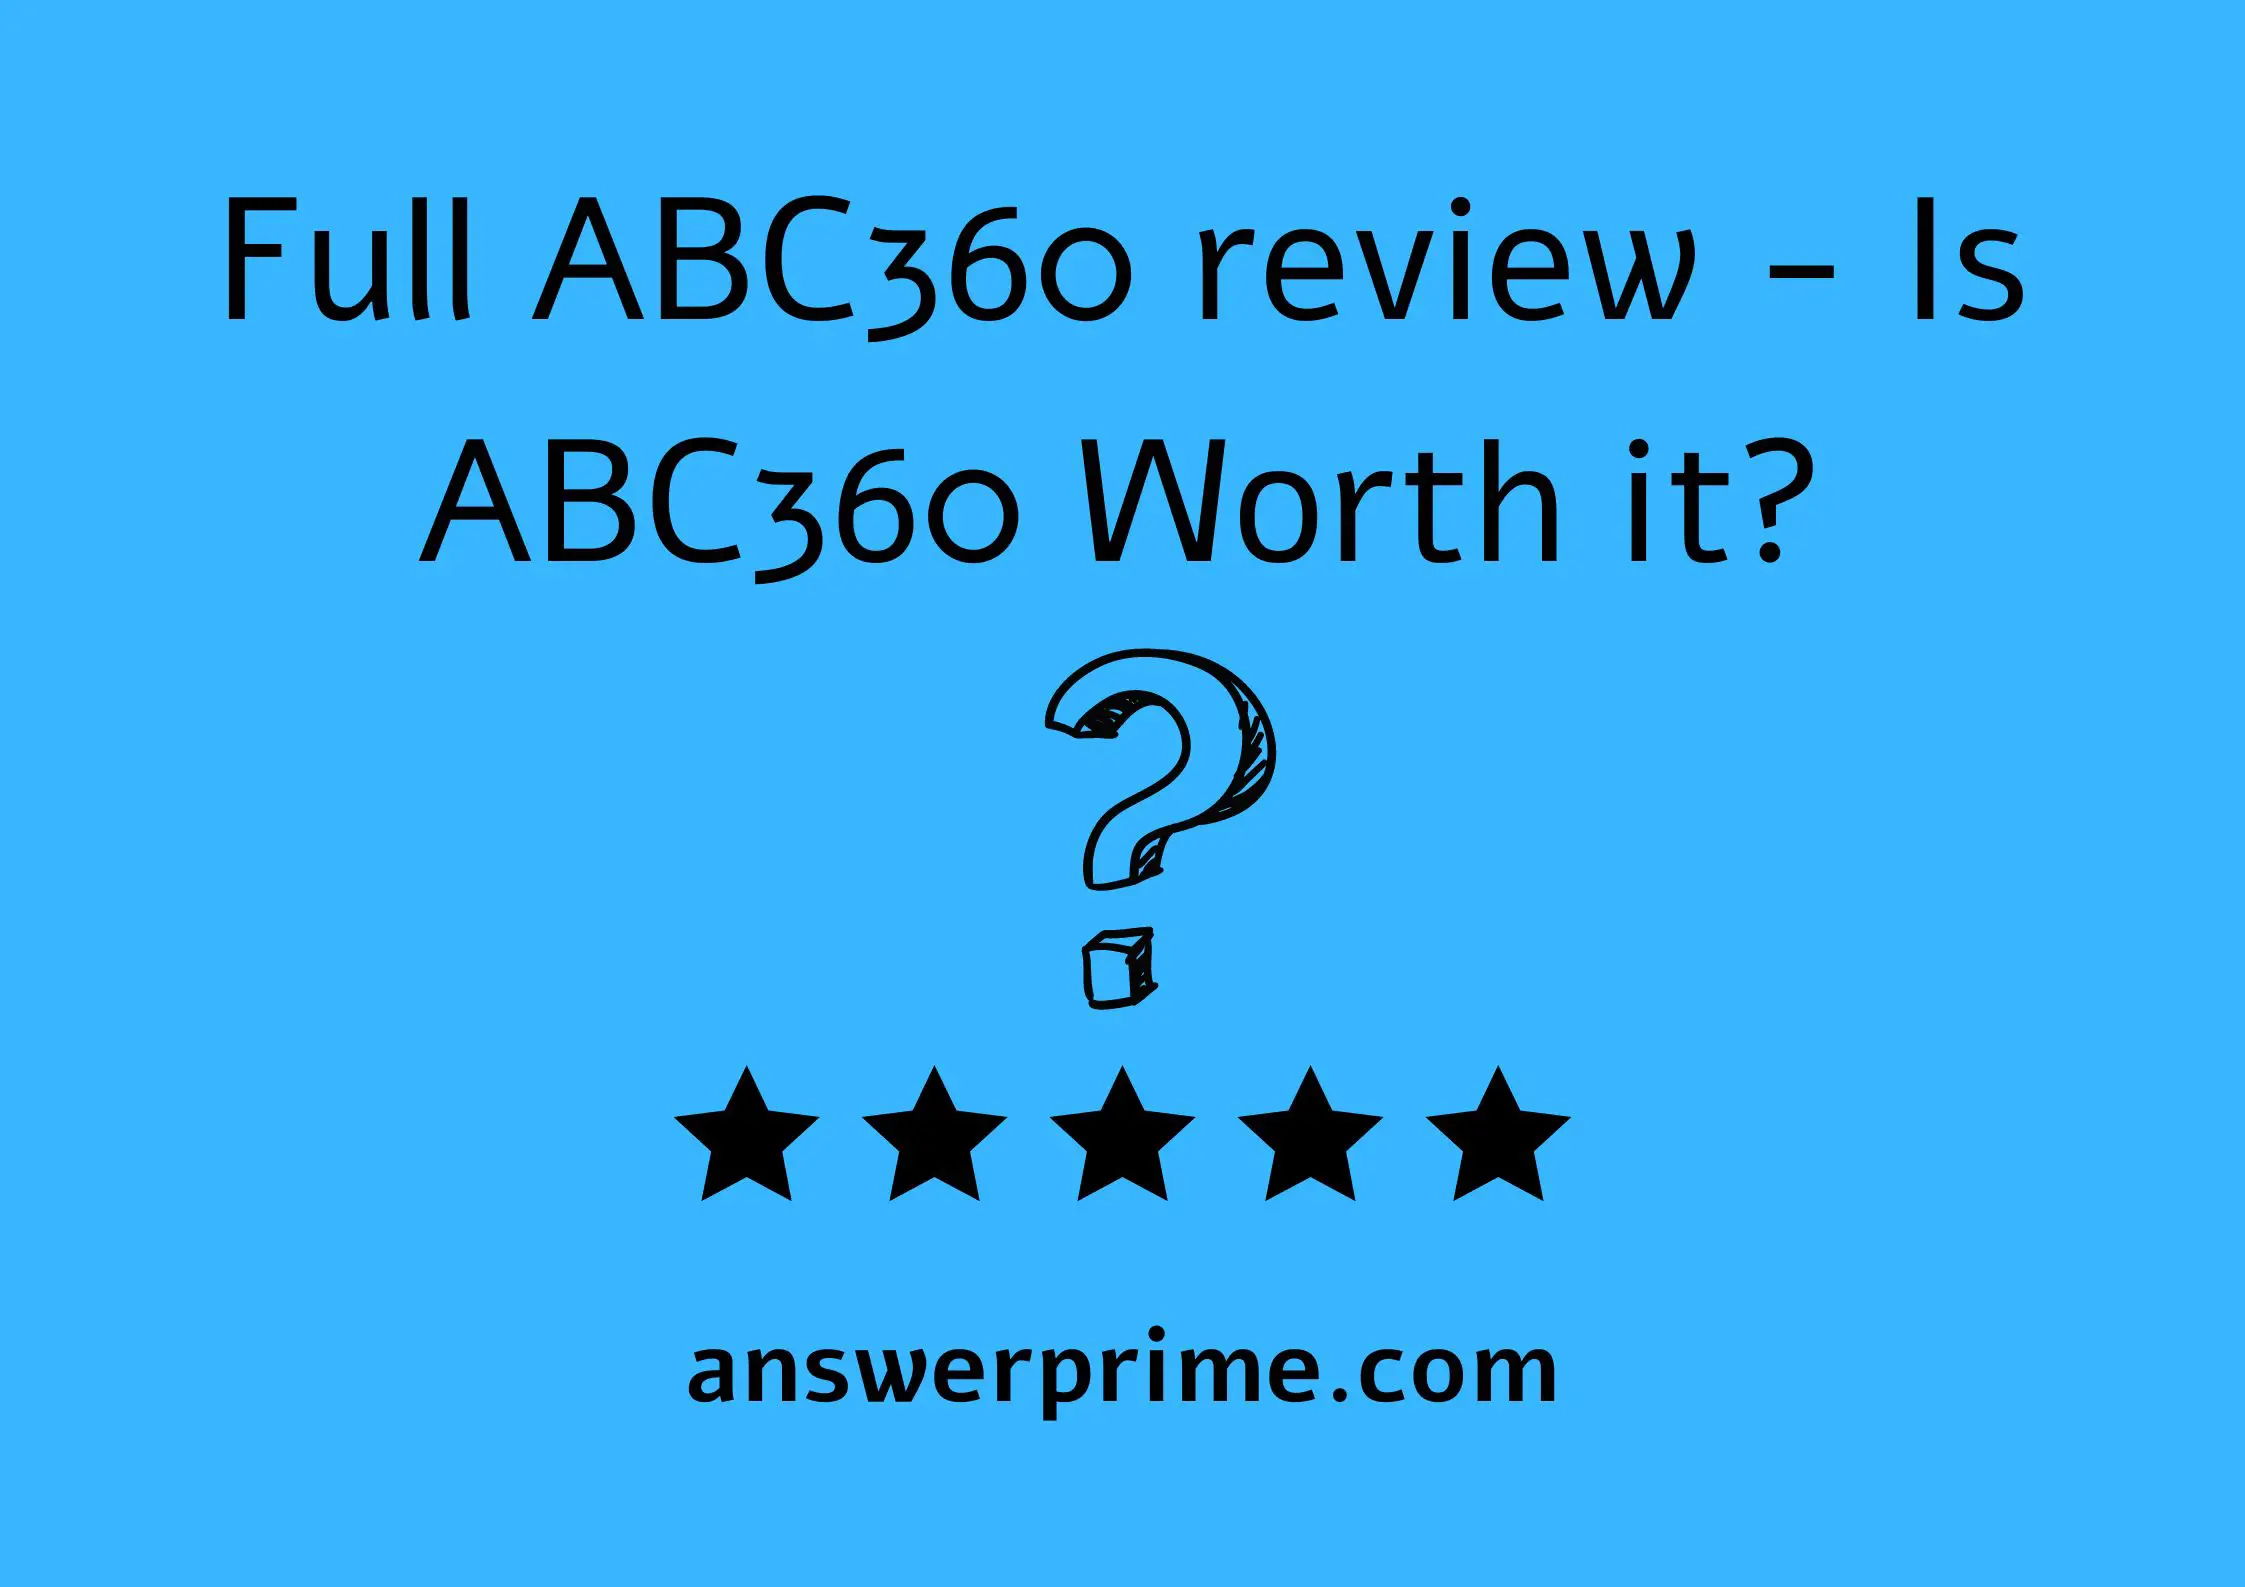 Full aBC360 review - Is aBC360 Worth it?